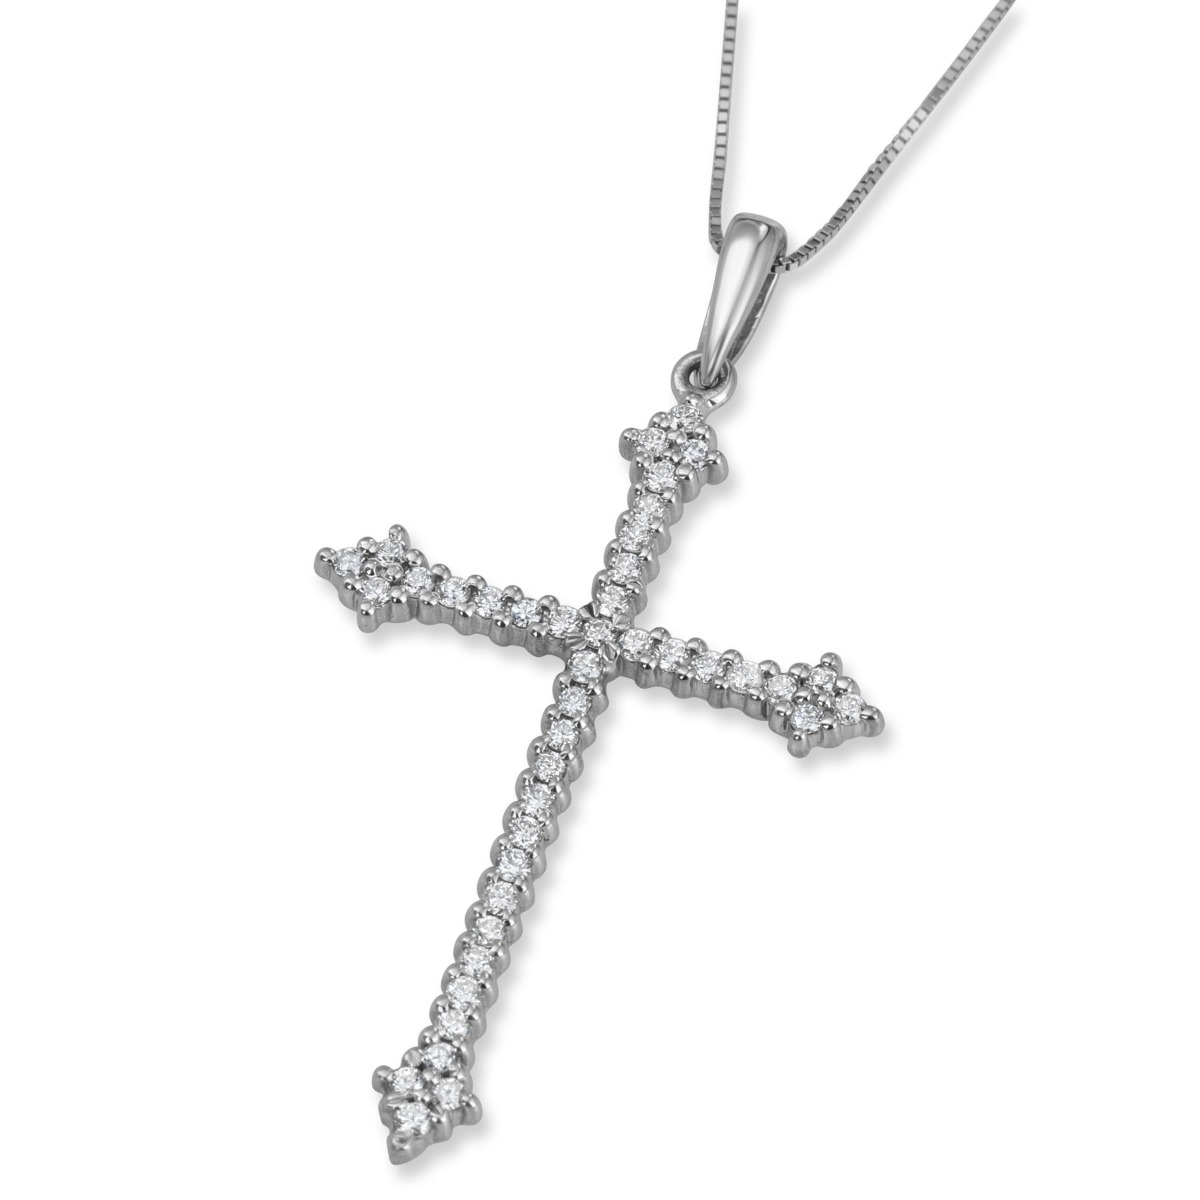 Deluxe 14K White Gold and Diamond Slender Budded Cross Pendant with 41 Diamonds - 1